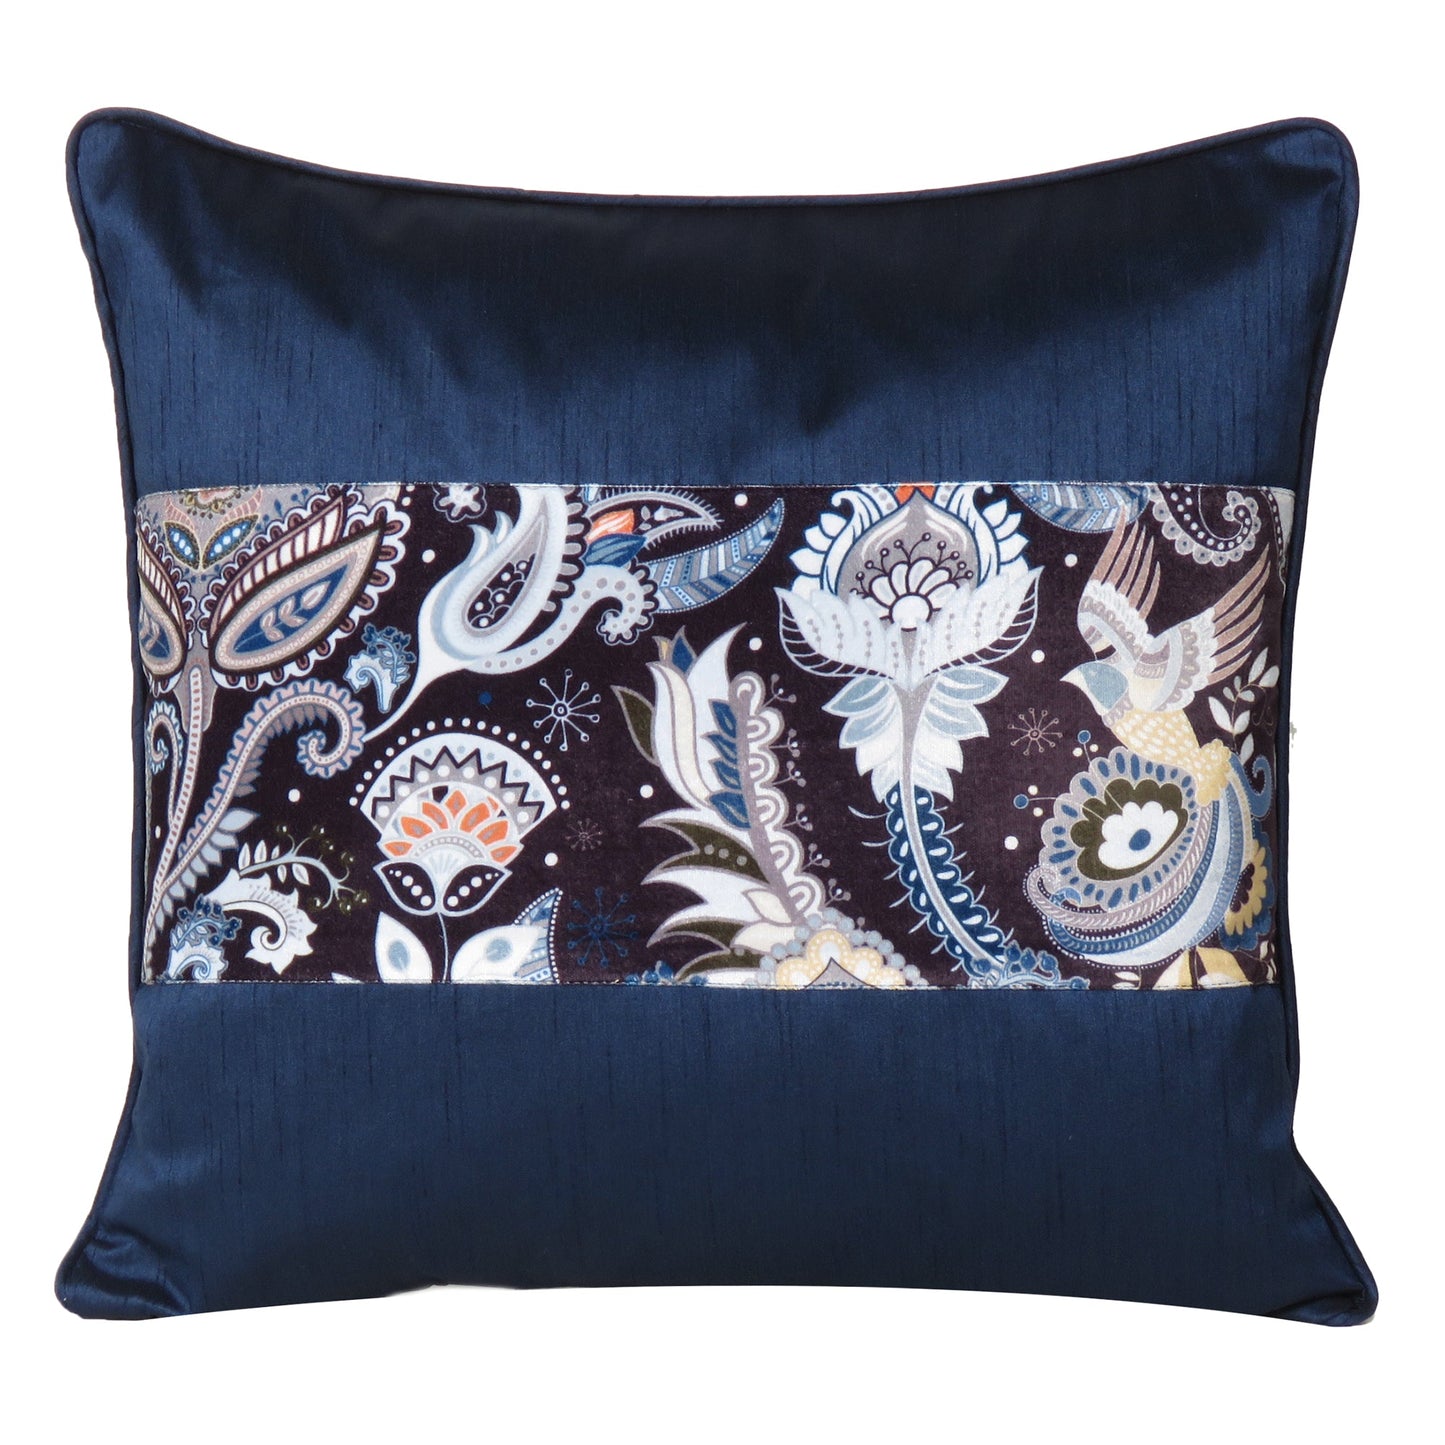 Velvet Polydupion Decorative Printed Cushion Cases in Set of 2 - Navy Blue